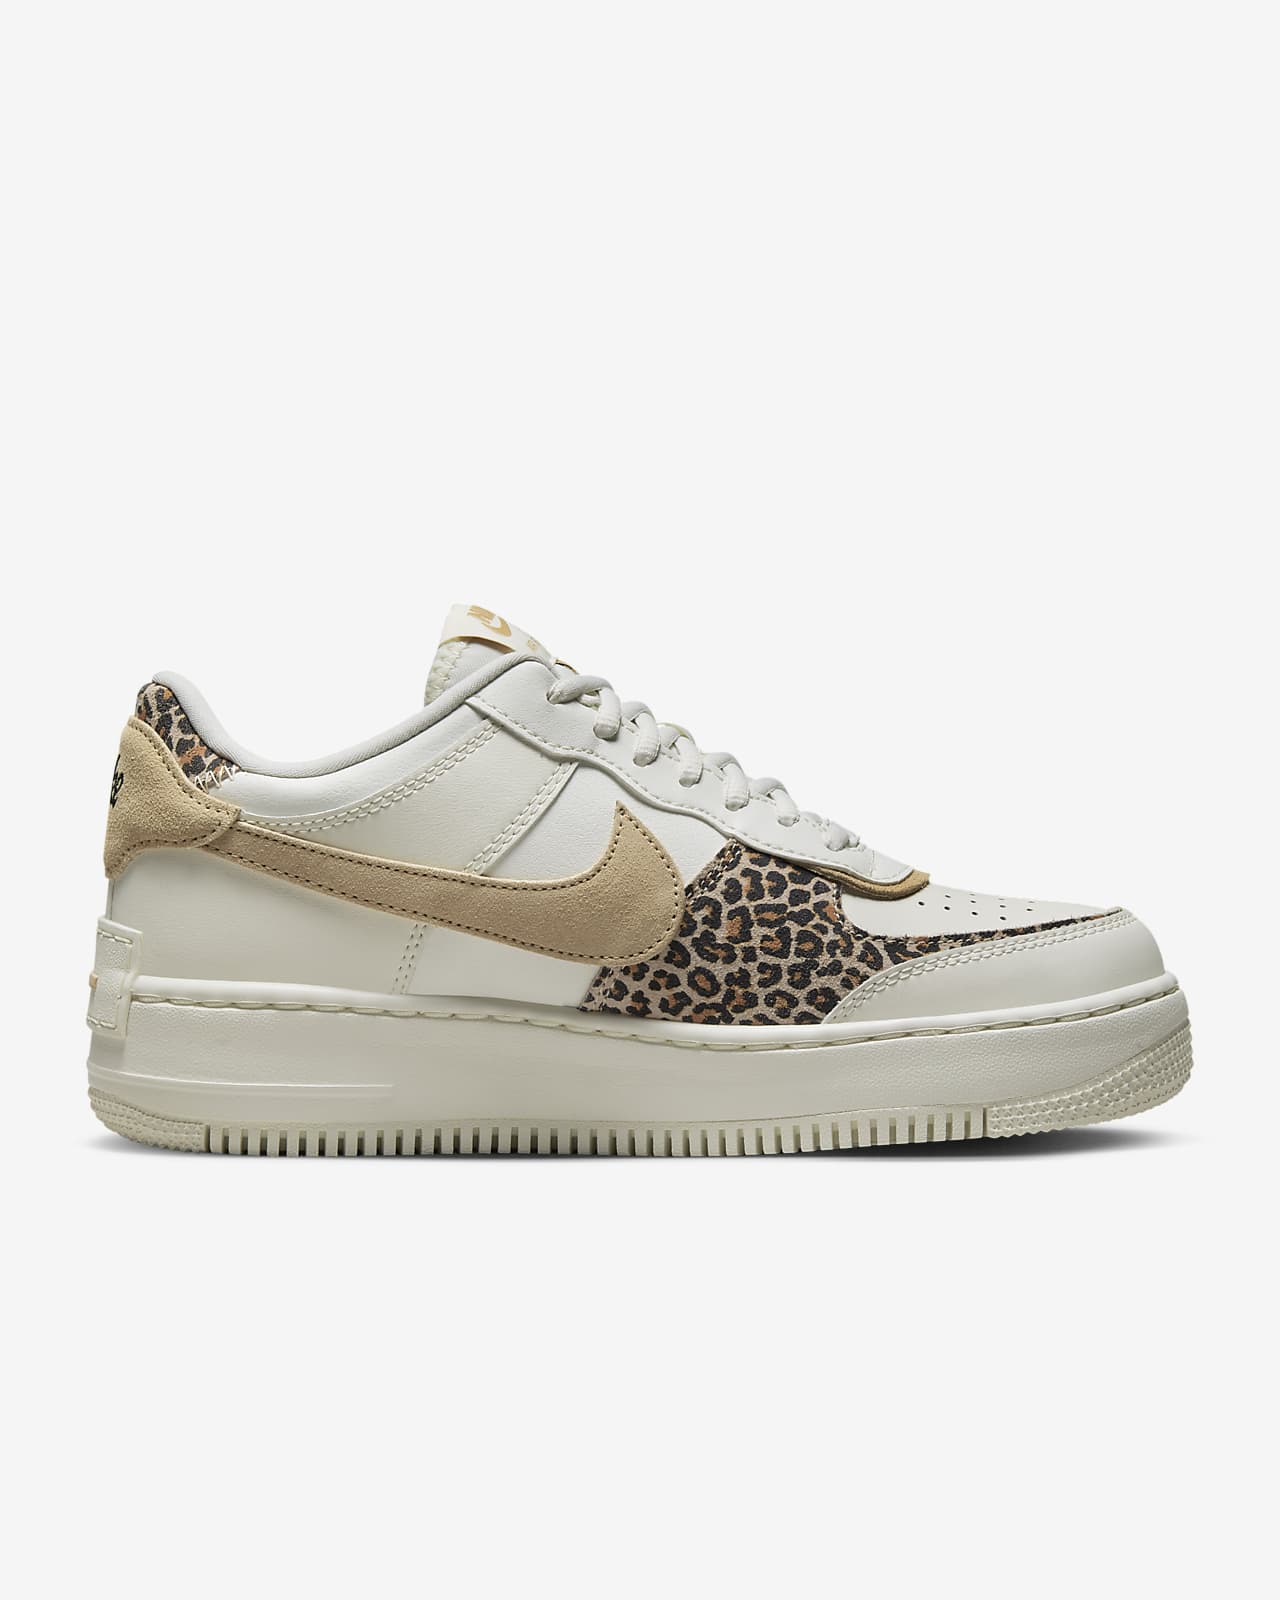 nike womens air force 1 shadow shoes stores